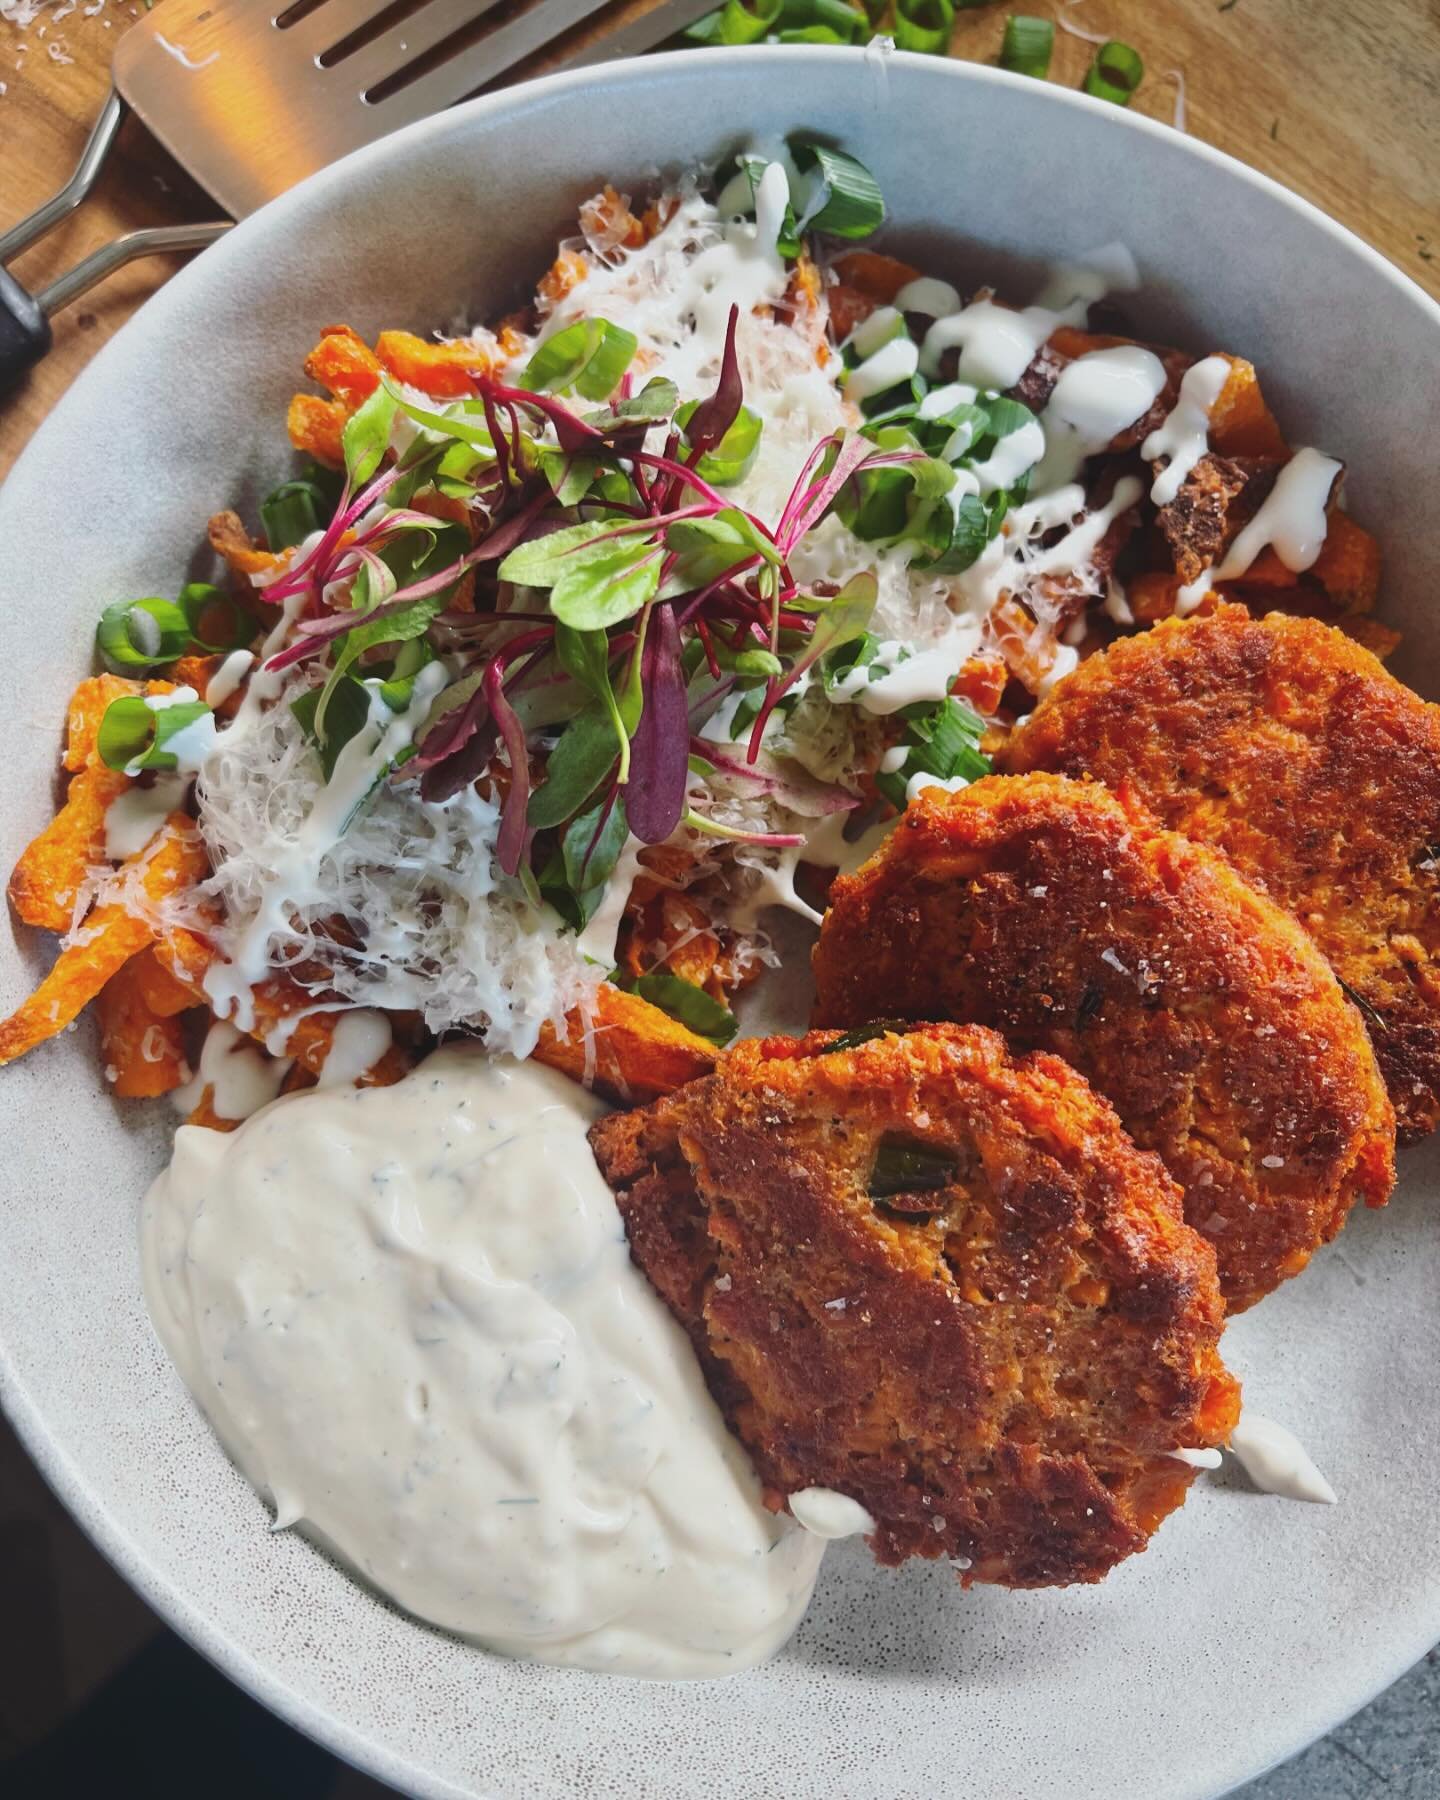 This combination hit the spot!  Sprinkled the Sweet Potatoes with Parmesan, Chives sour cream and Micro greens.  #dinnerideas 

Salmon Patties
@themodernproper 

Dill Dip @themodernproper 

Baked Sweet Potato Fries
@acouplecooks